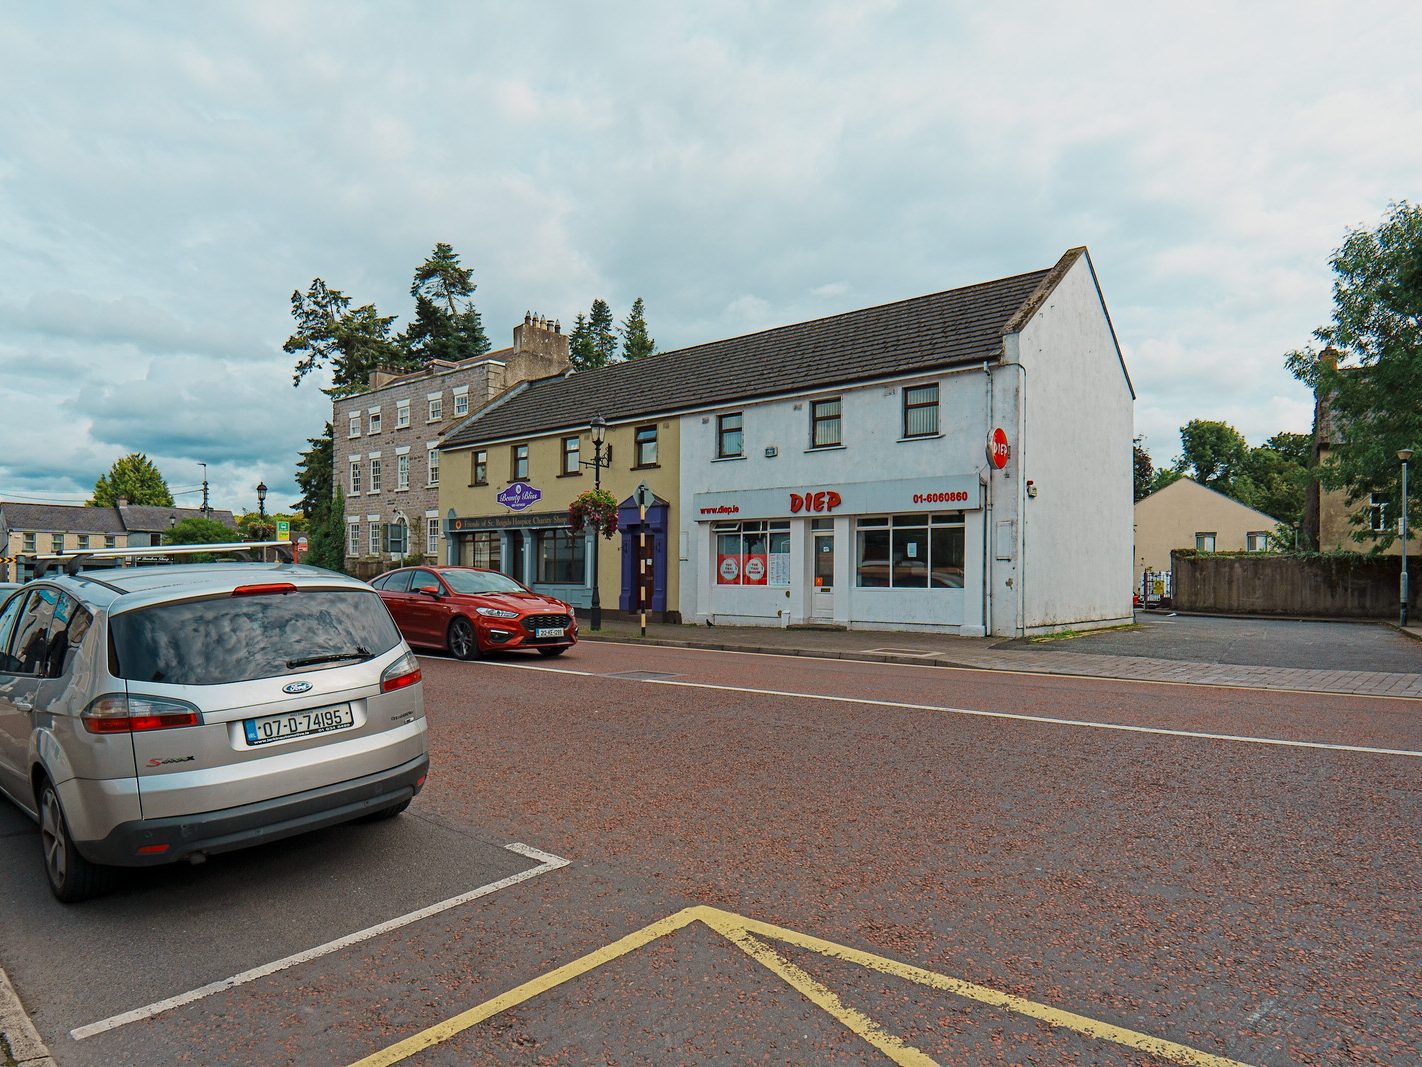 LEIXLIP MAIN STREET [HOME TO THE FARENDERS RATHER THAN THE HILLERS] 002